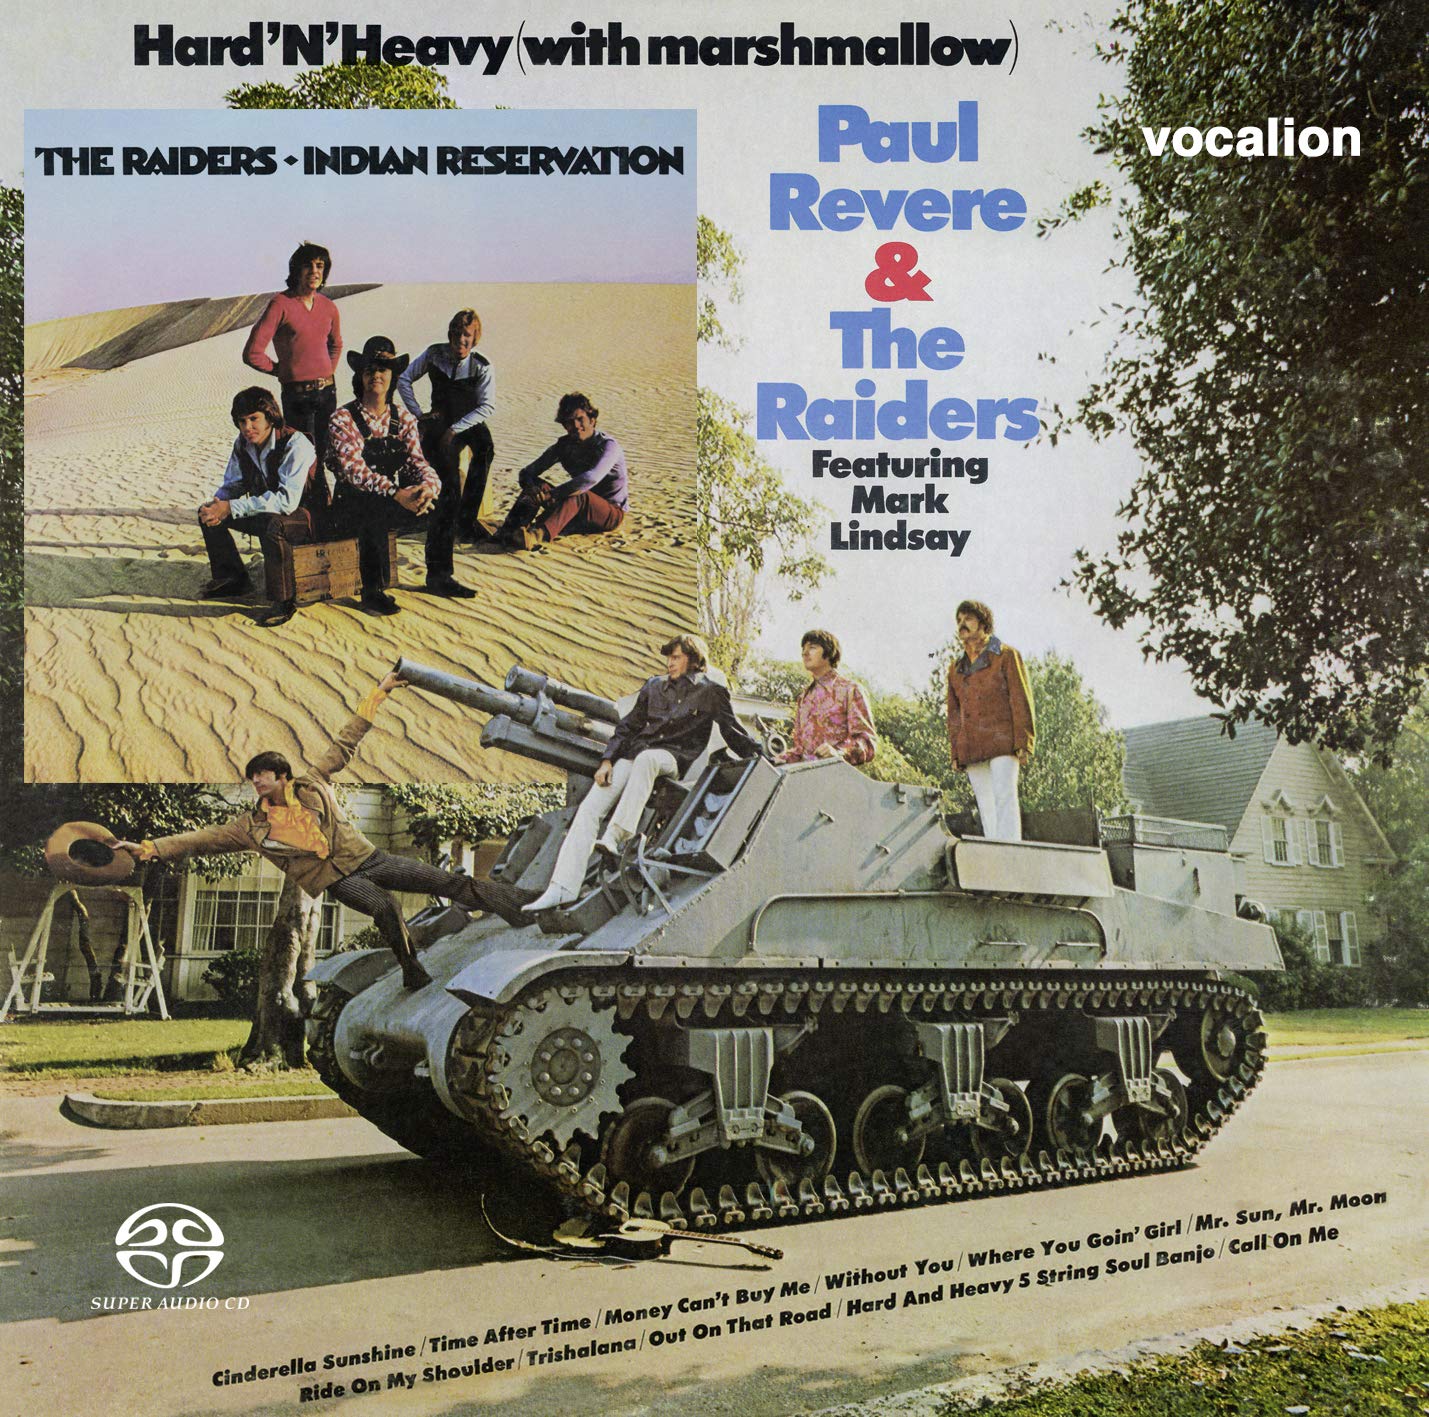 Paul Revere and The Raiders – Hard ‘N’ Heavy & Indian Reservation (1969 & 1971) [Reissue 2019] MCH SACD ISO + FLAC 24bit/96kHz